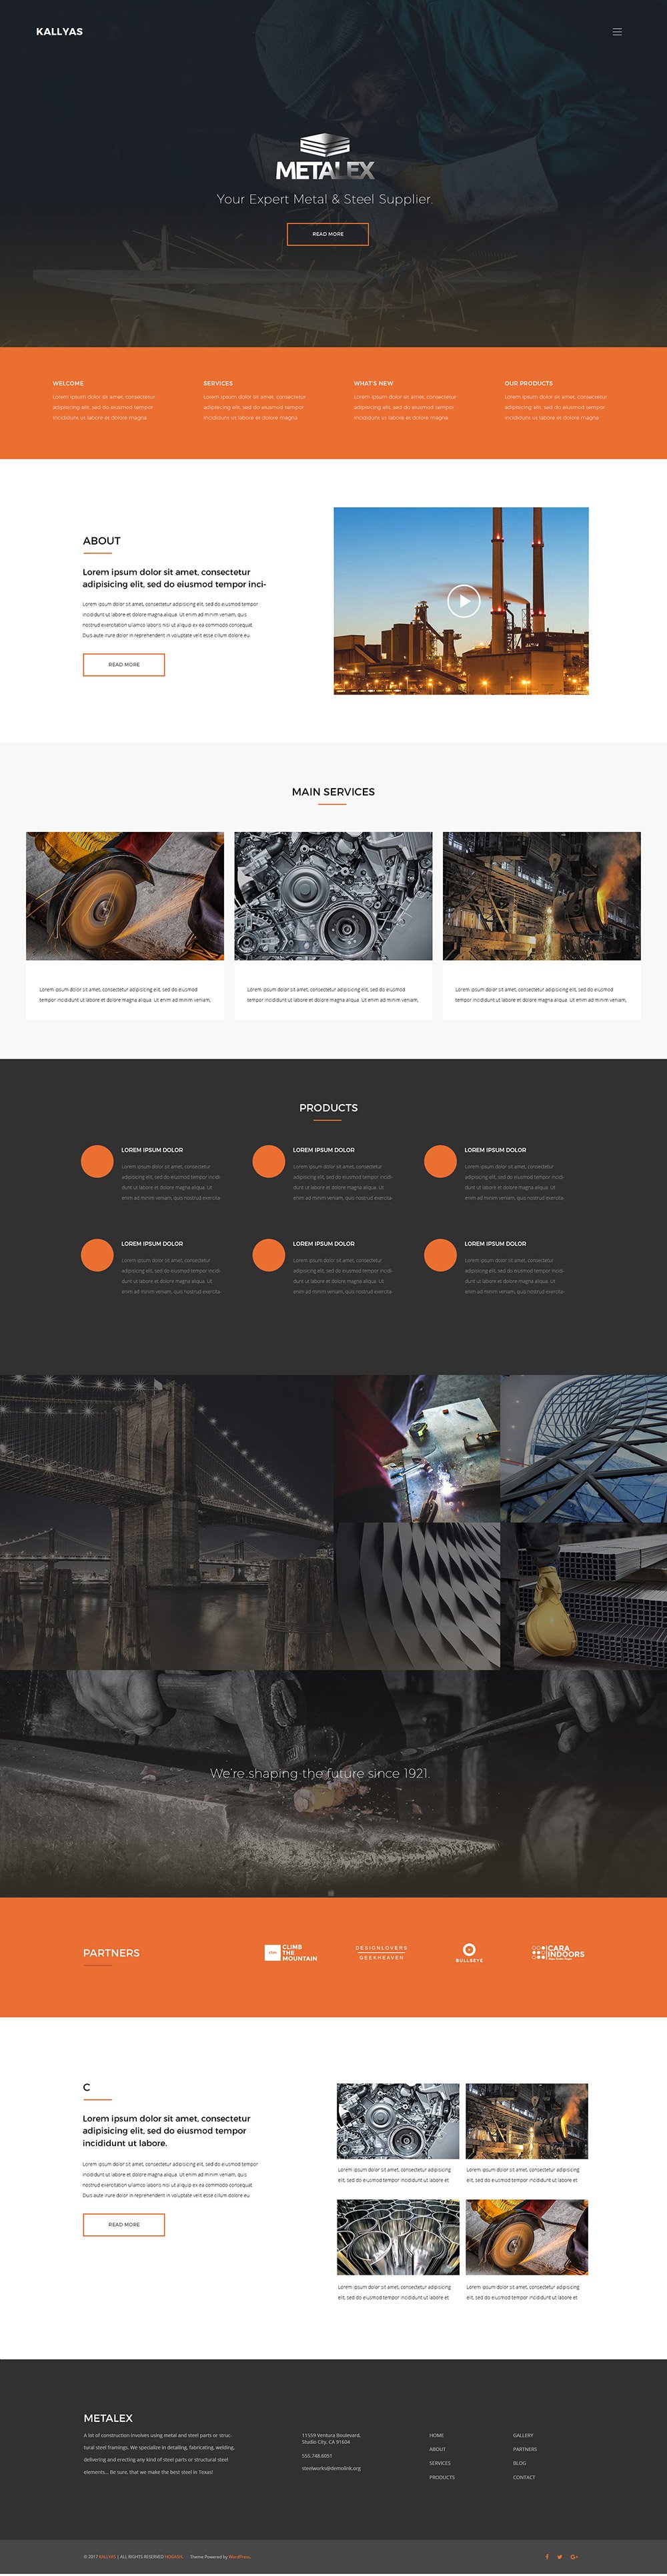 Metal Works - Free PSD Template